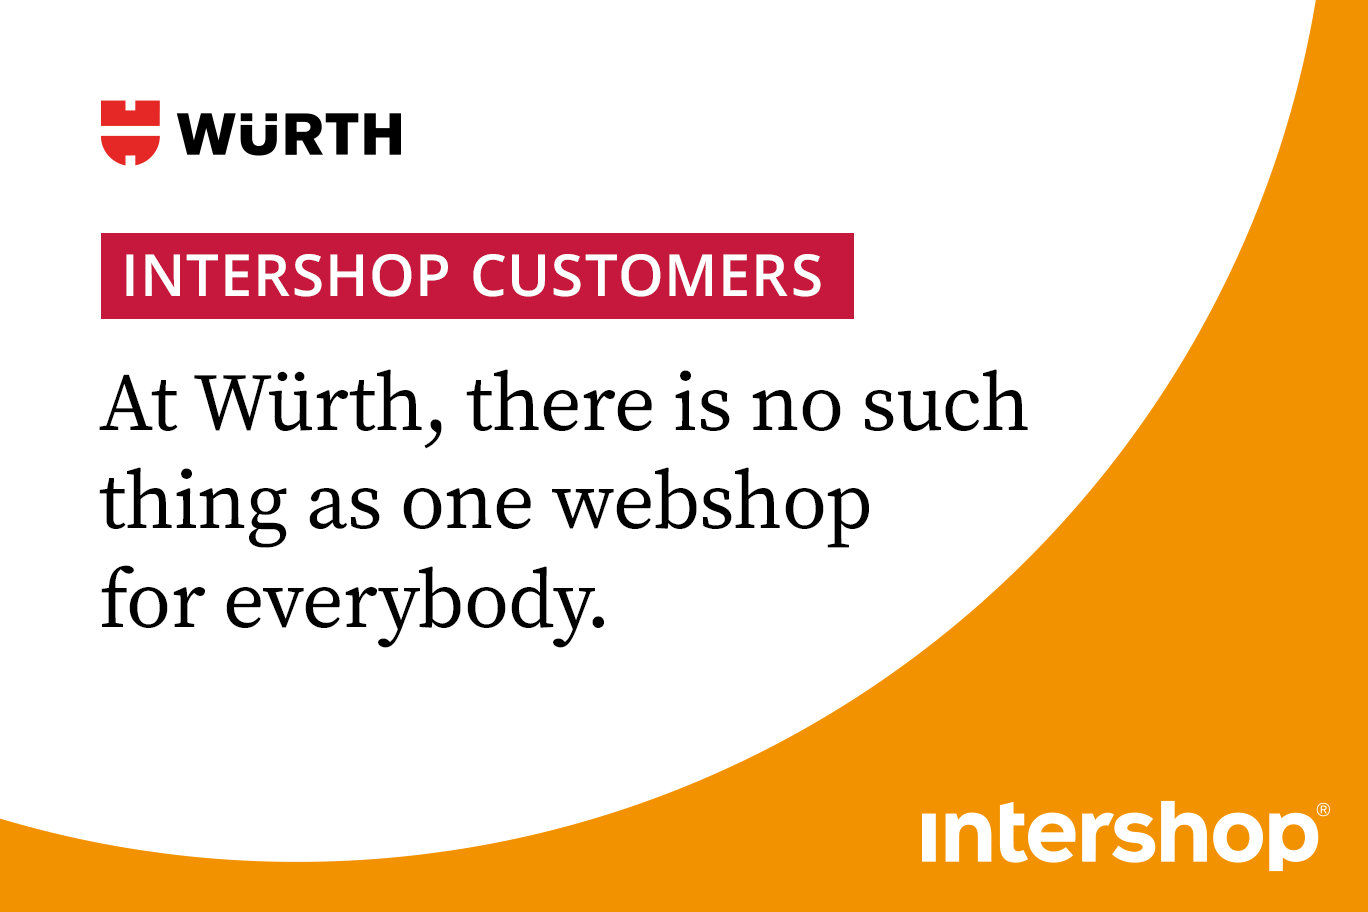 Video: Our customer Würth